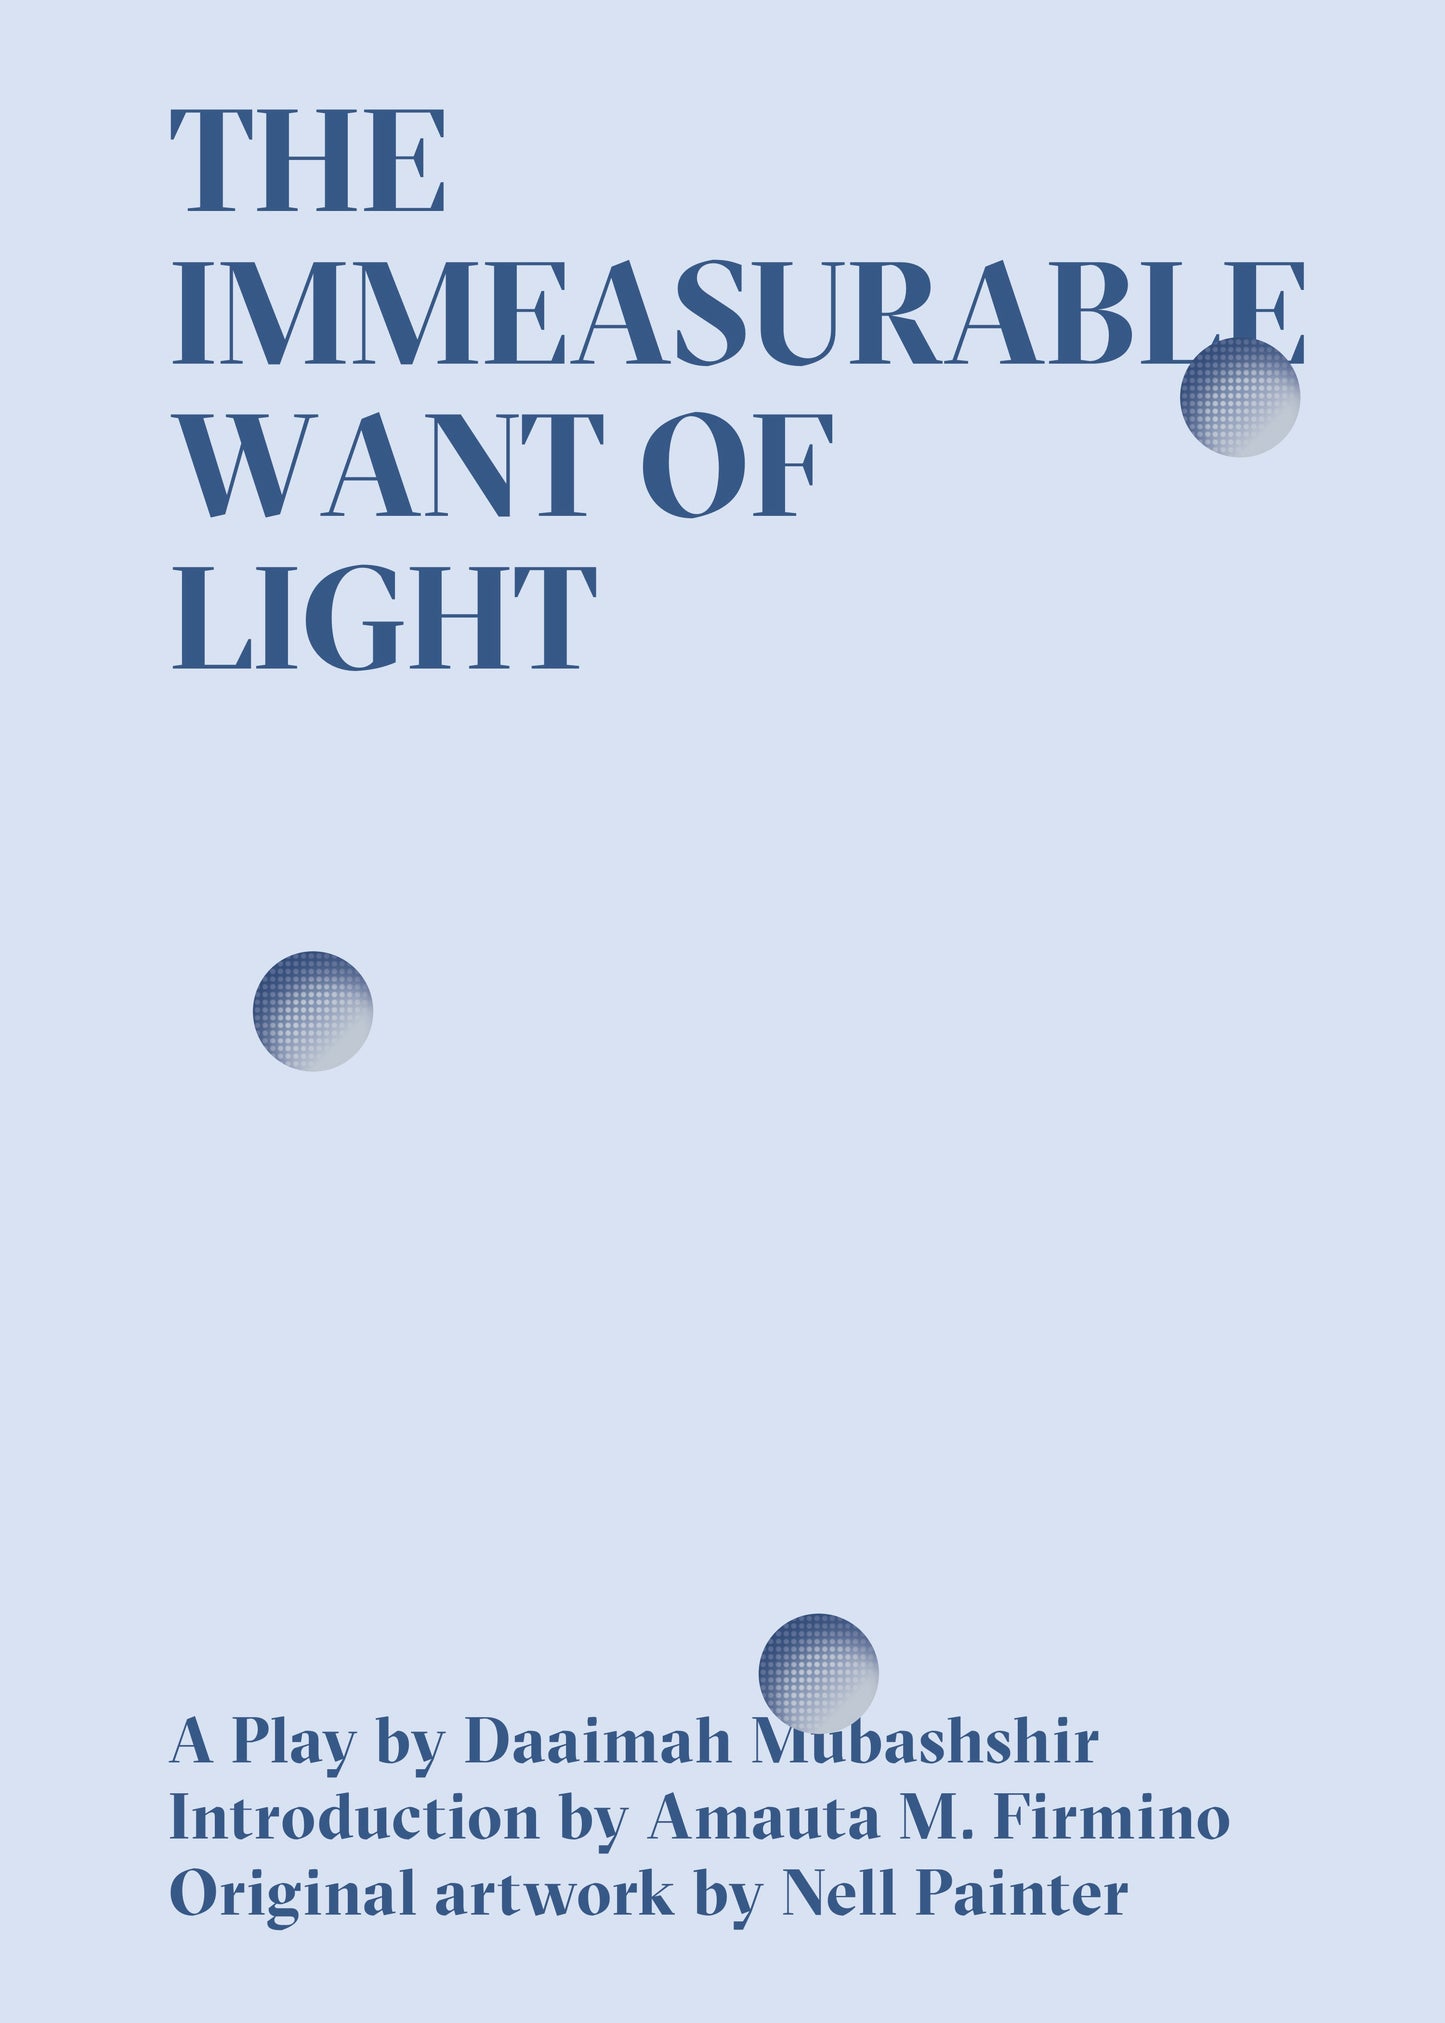 The Immeasurable Want of Light